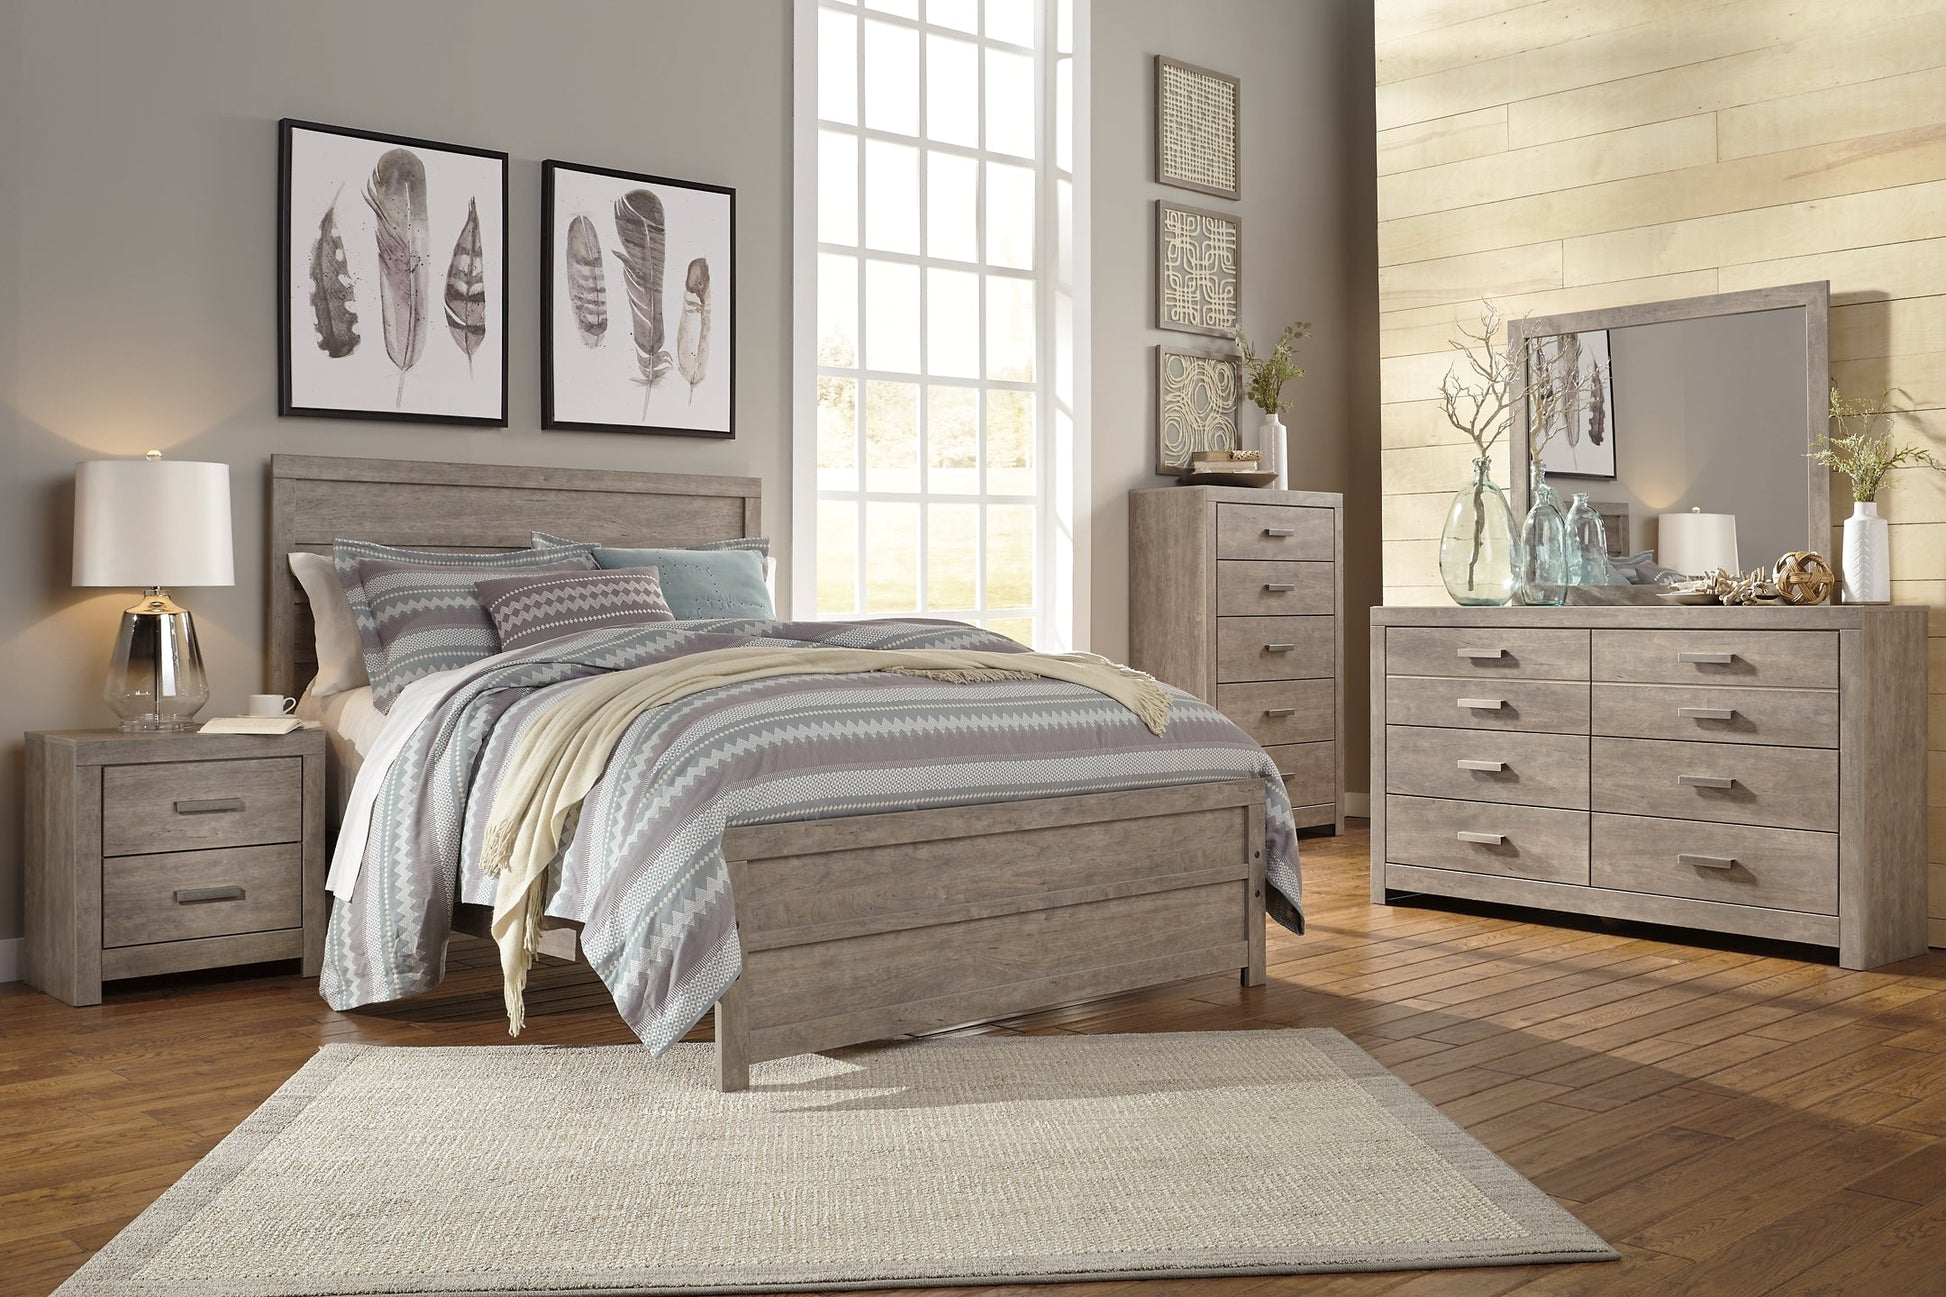 Culverbach Two Drawer Night Stand at Walker Mattress and Furniture Locations in Cedar Park and Belton TX.